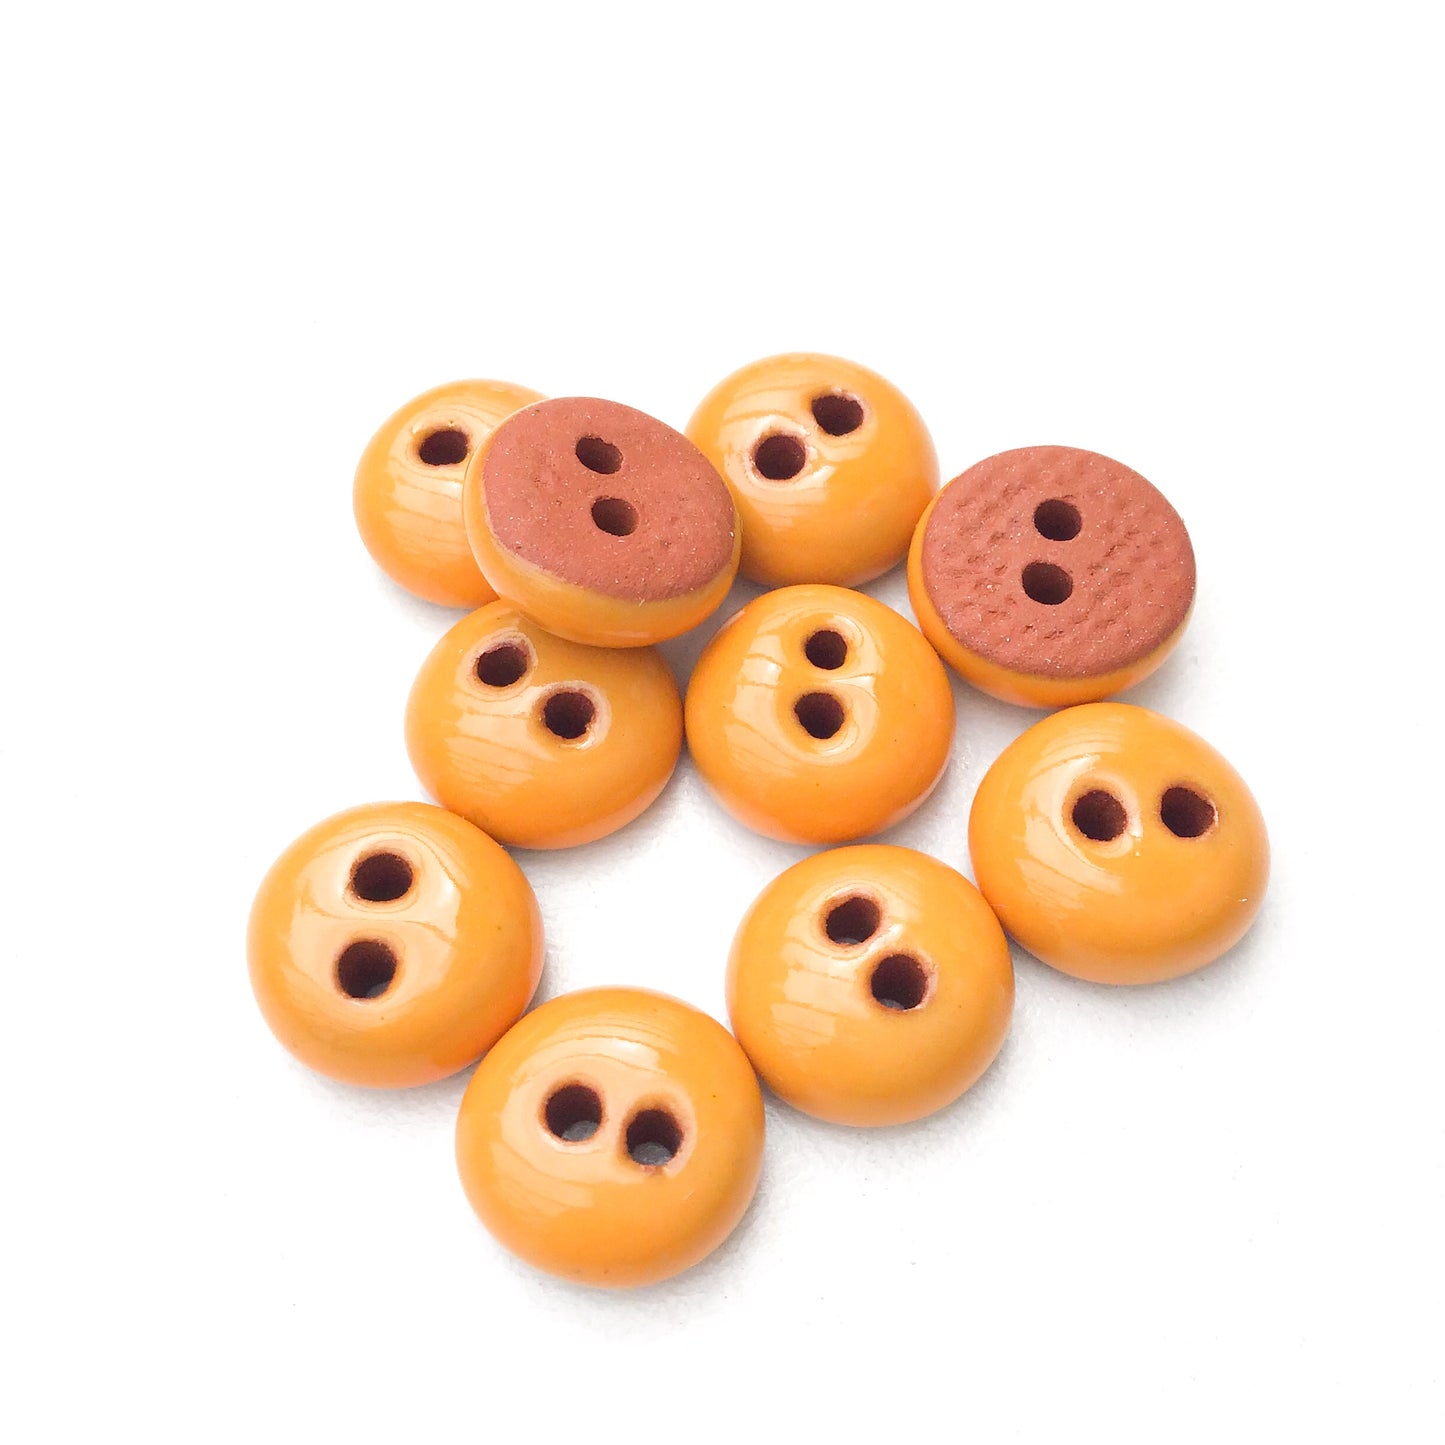 Orange Ceramic Buttons - Hand Made Clay Buttons - 7/16" - 10 Pack